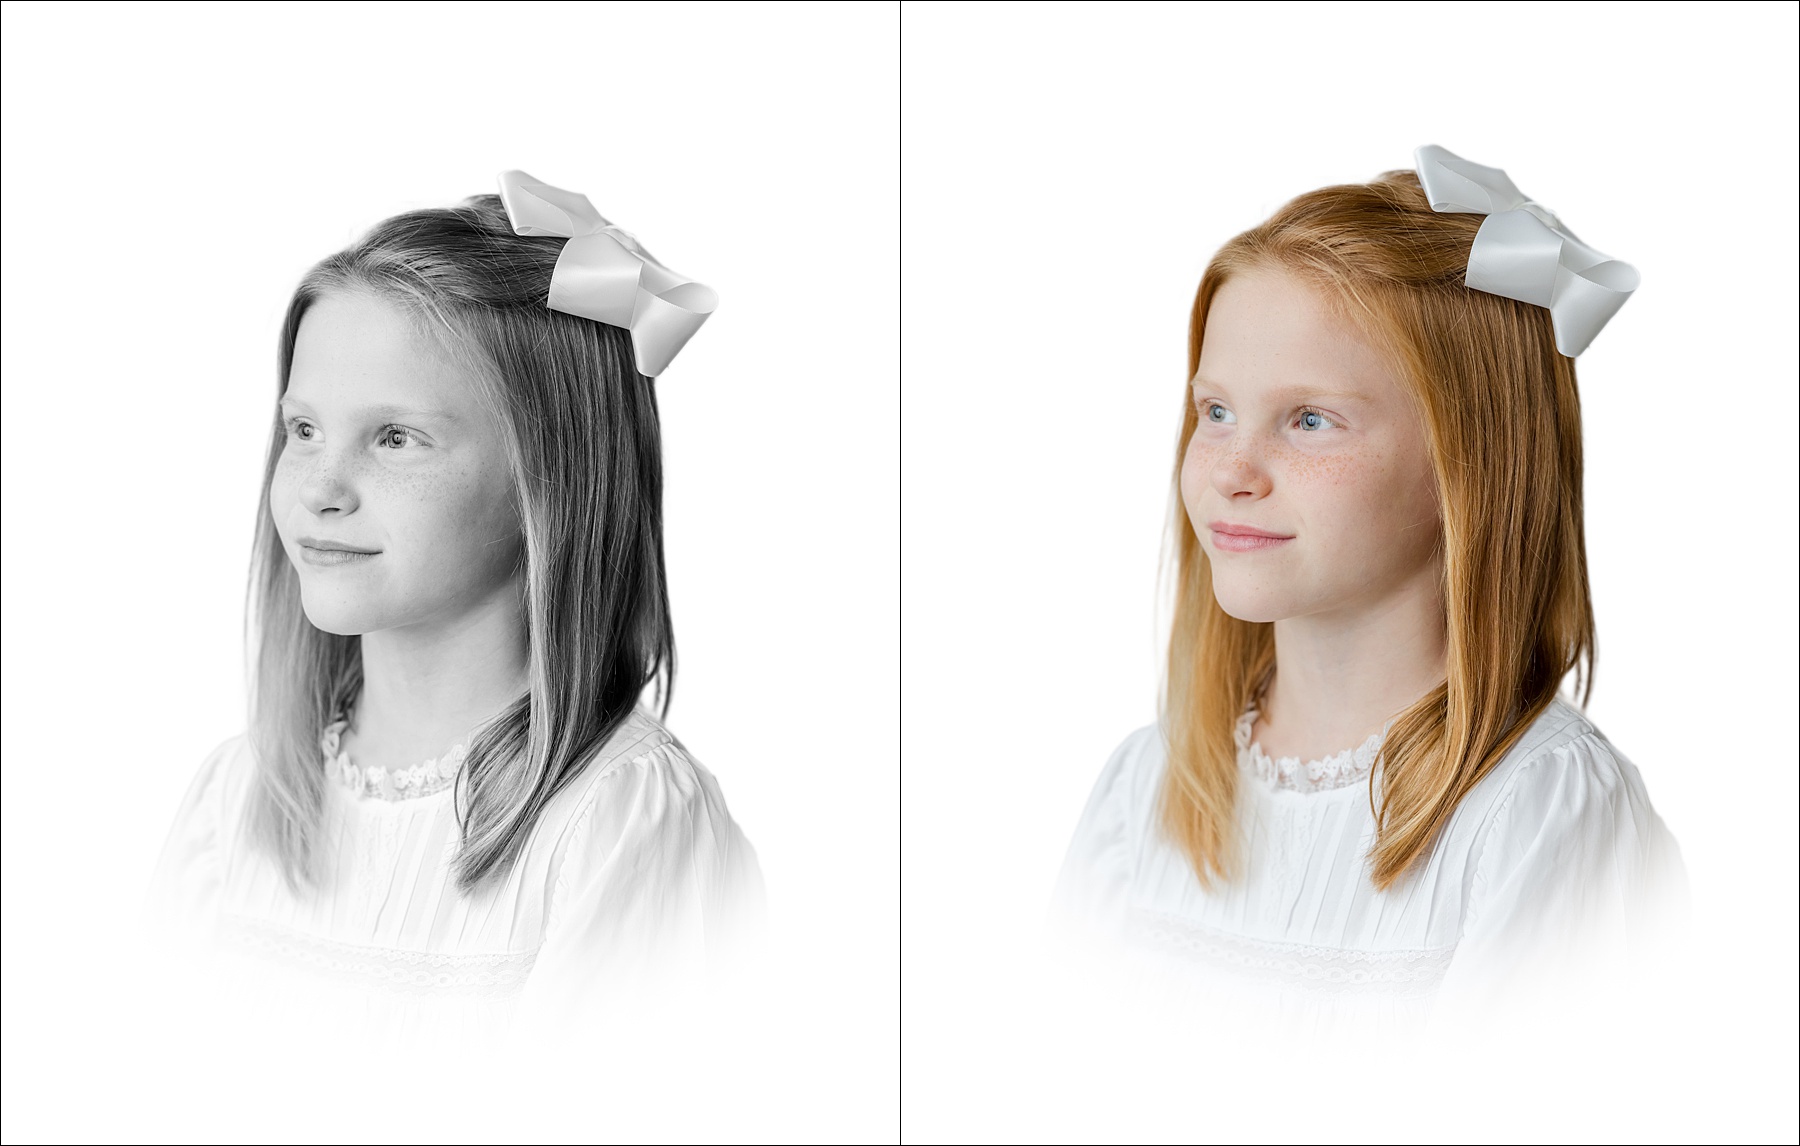 South Carolina heirloom portraits with a white vignette of a red headed young girl in color and black and white.